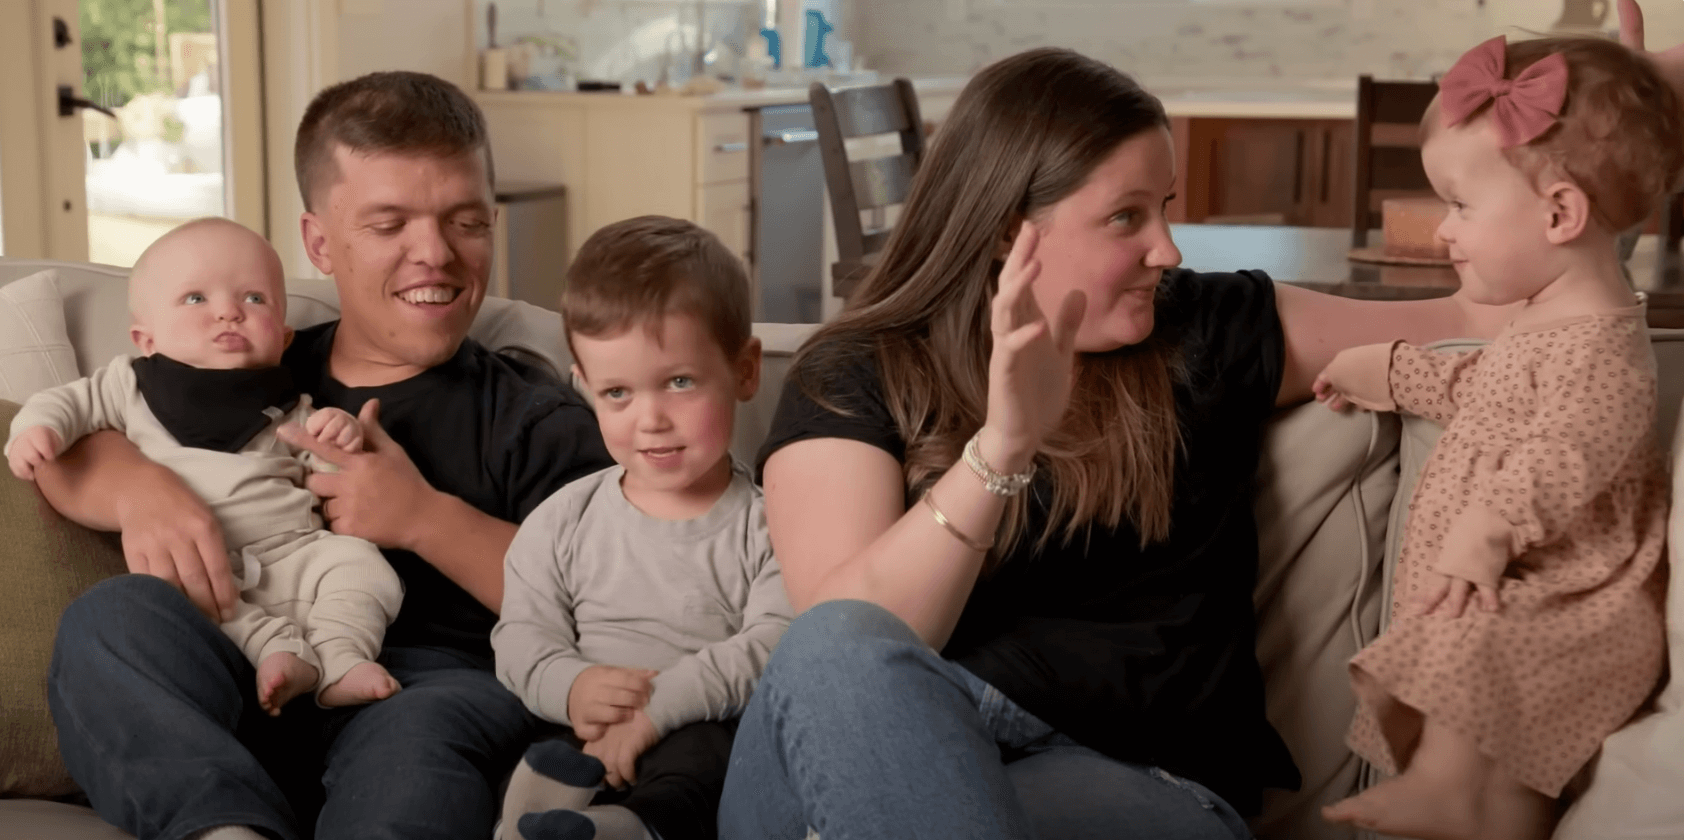 Zach and Tori Roloff sitting on the couch with their 3 kids in 'Little People, Big World'